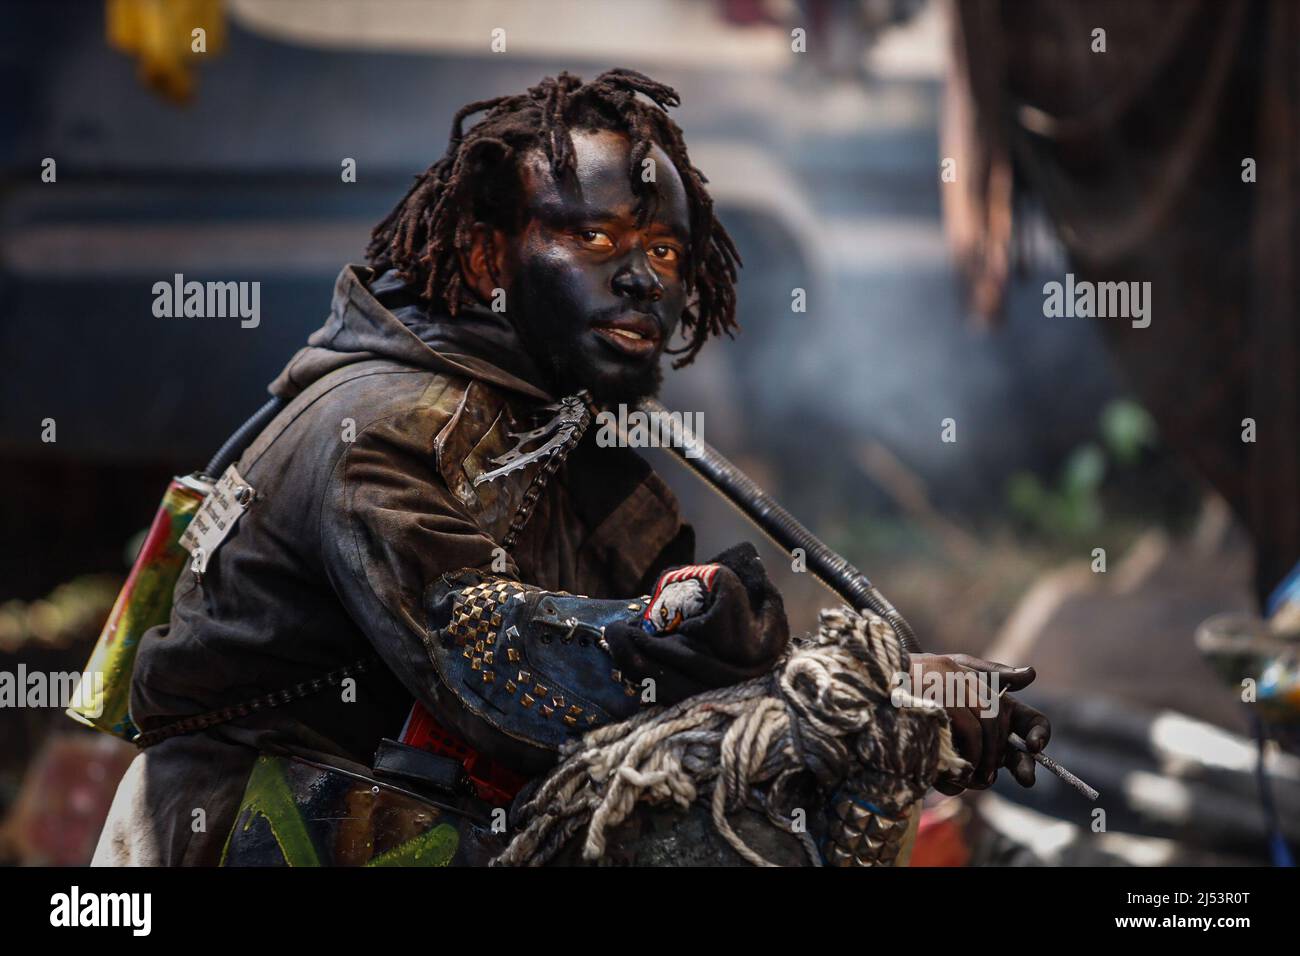 An artist dressed in a post-apocalyptic costume smokes a cigar during a  film production of a music video. Artists from Kibera dressed up in post-apocalyptic  costumes to shoot a music video focusing